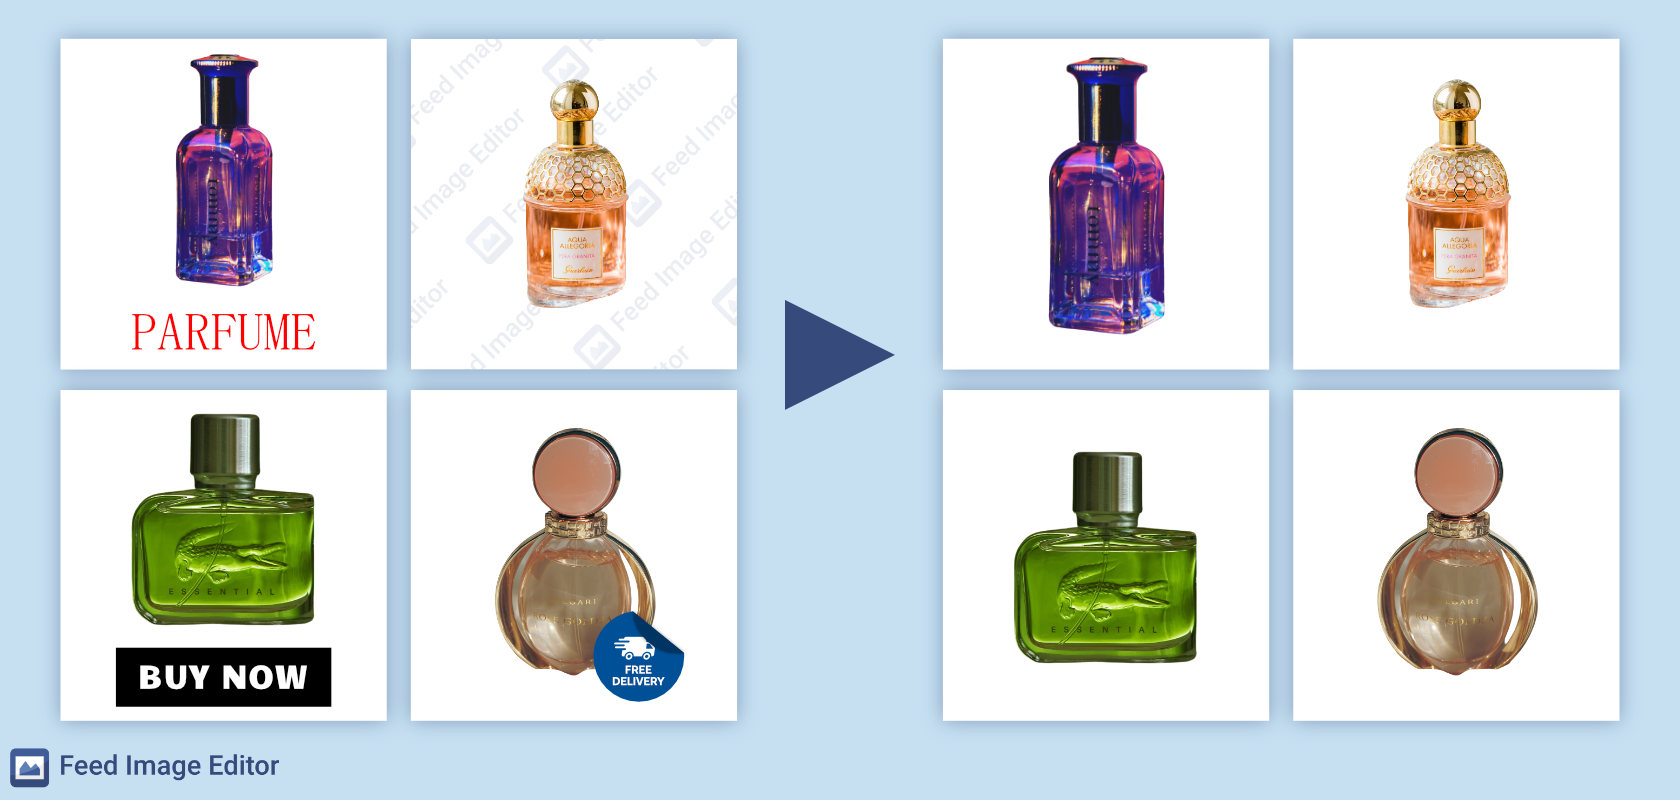 remove_background_watermark_text_product_image